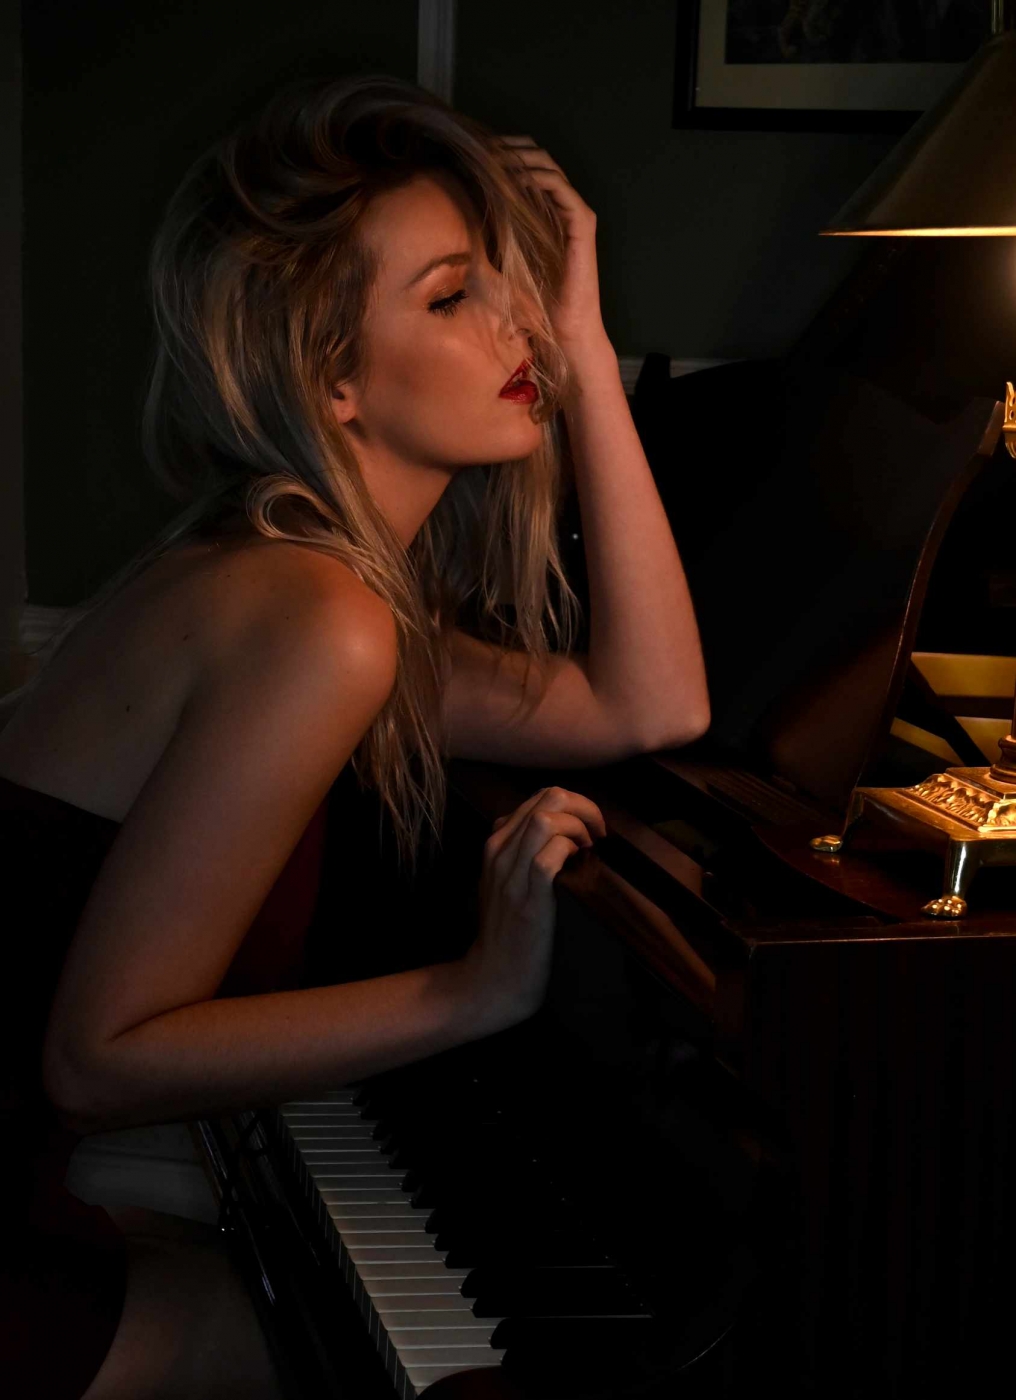 photographer JMKERR conceptual  photo. amber at the piano.